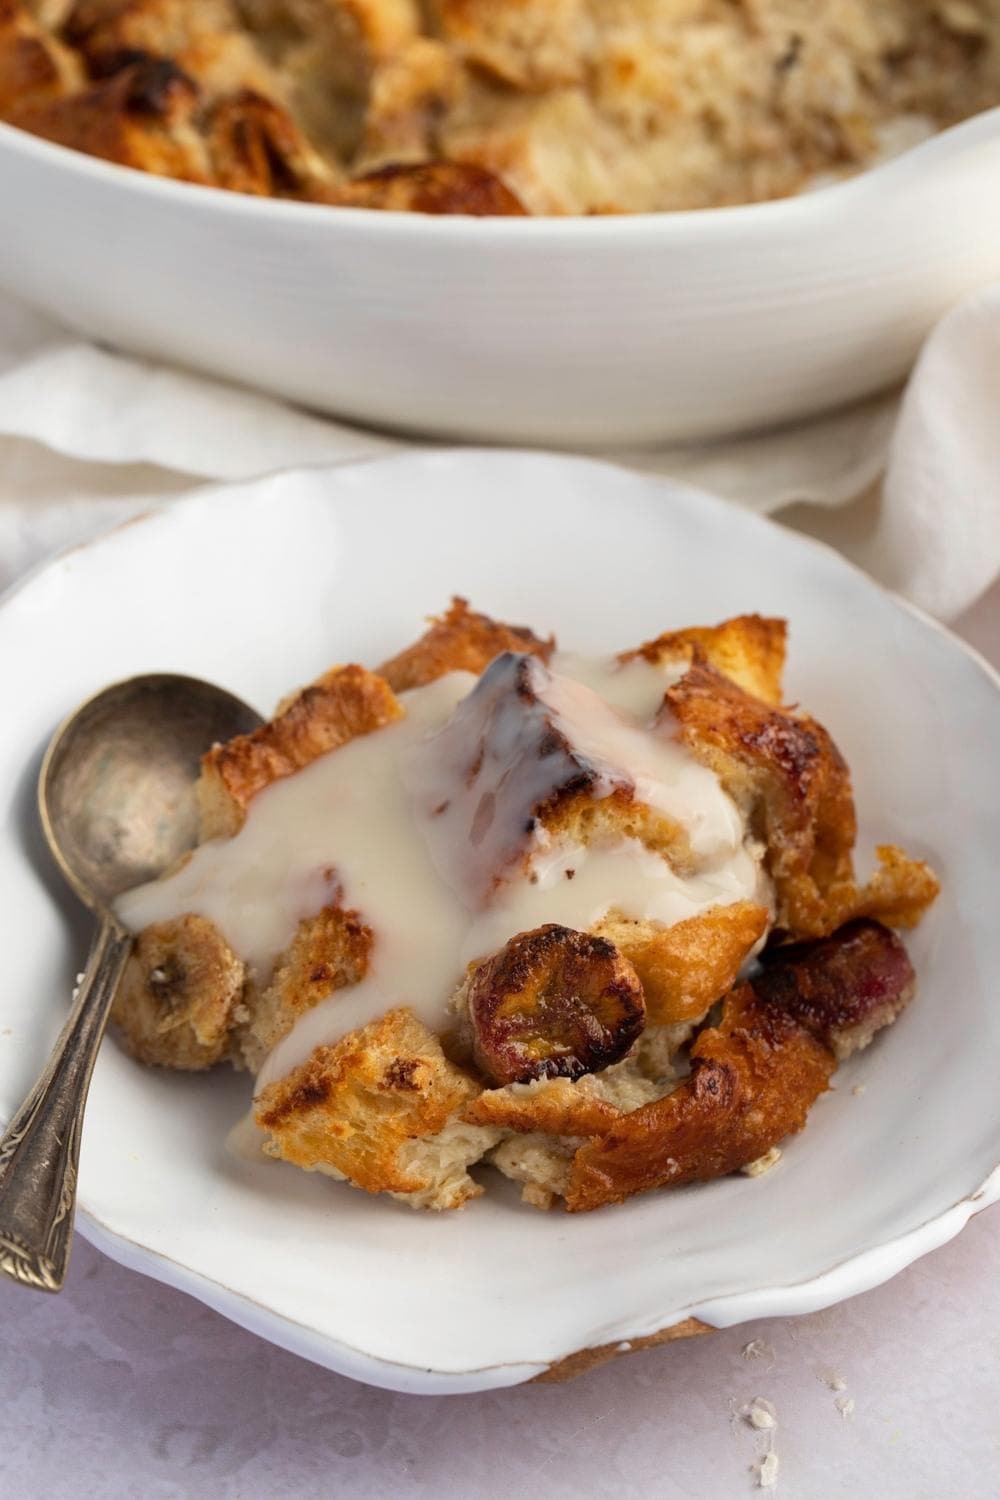 Banana Bread Pudding Served on a Plate